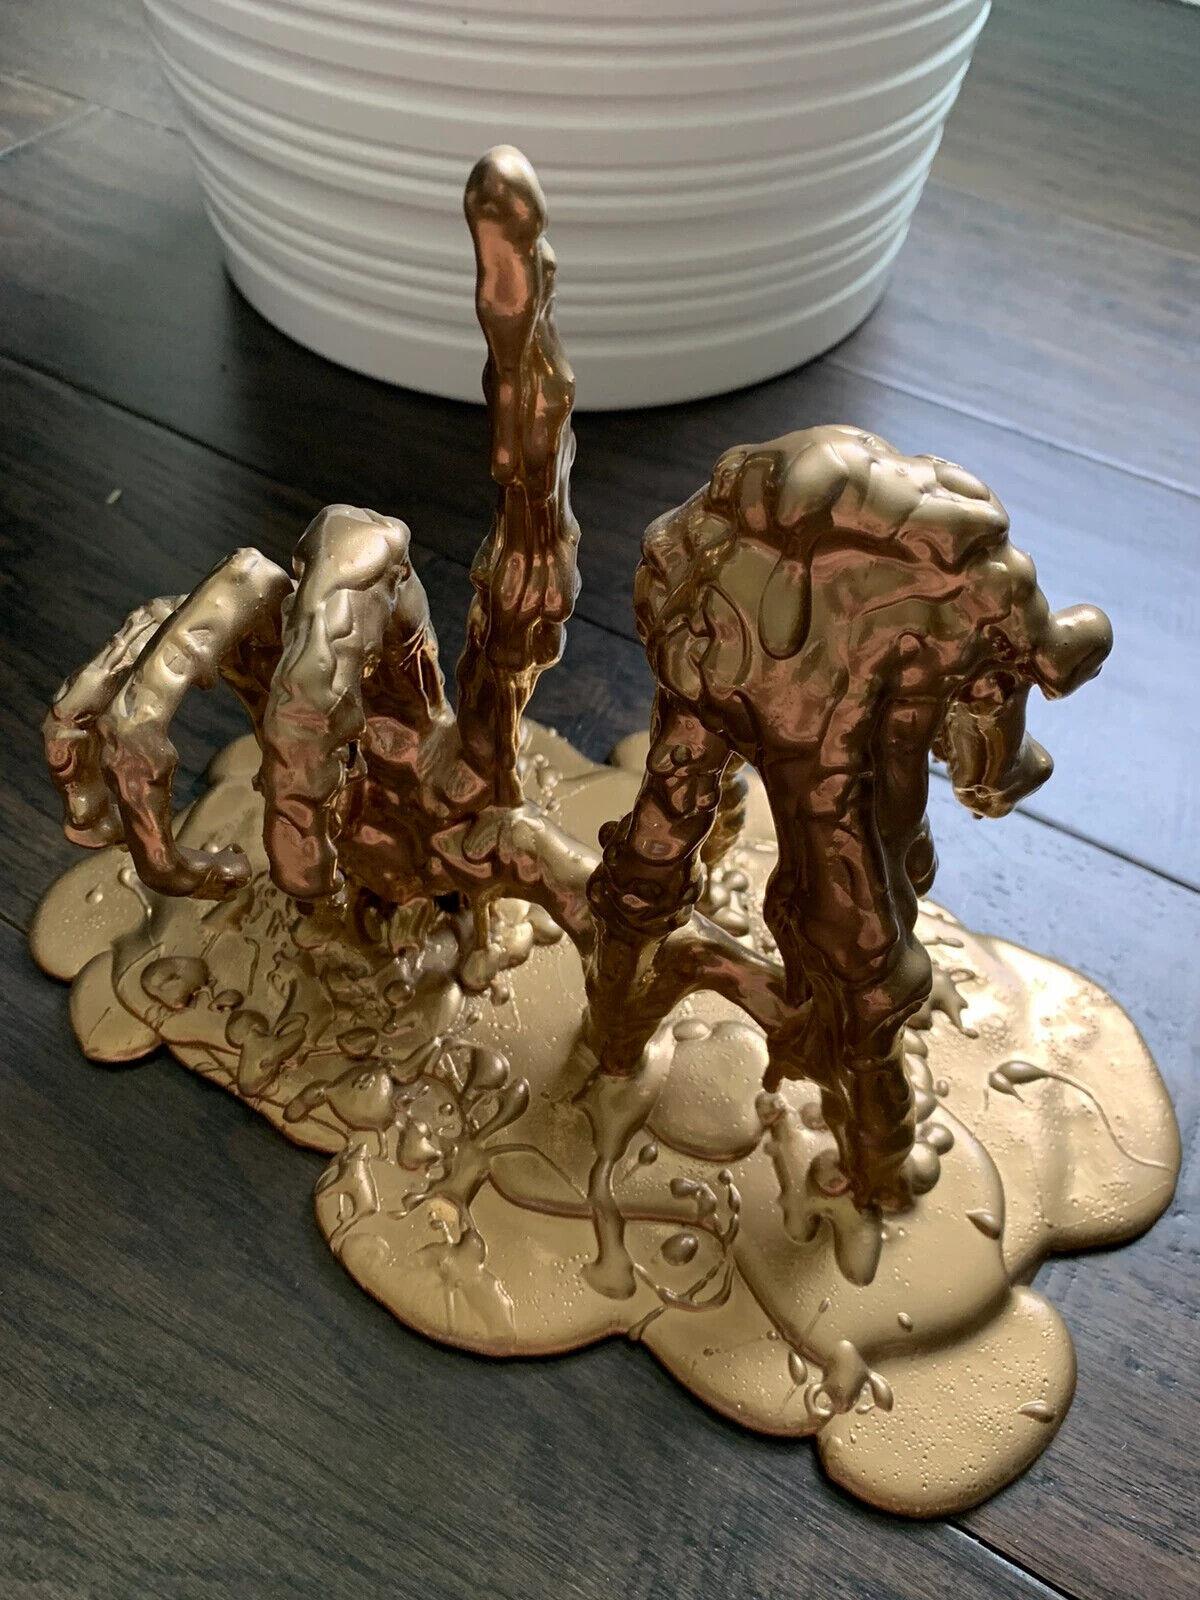 Introducing a rare and unique sculpture out of production, the one-of-a-kind LA Fingers by Jack of the Dust. This SFX grade liquid urethane casting resin sculpture features two skeleton hands throwing the iconic LA hand sign, popularized by the